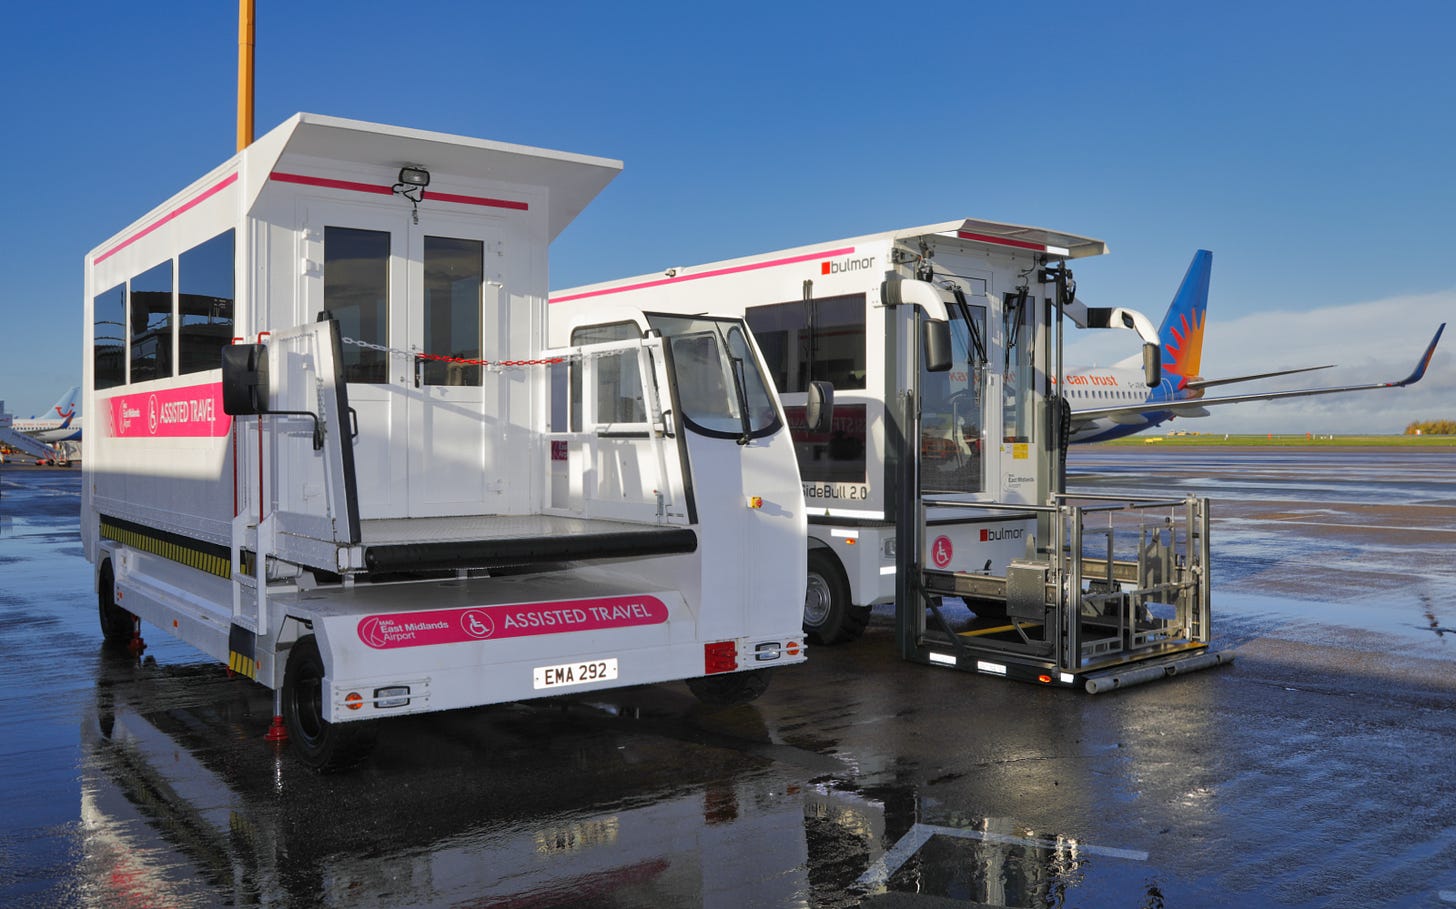 Two ambulifts at East Midlands Airport